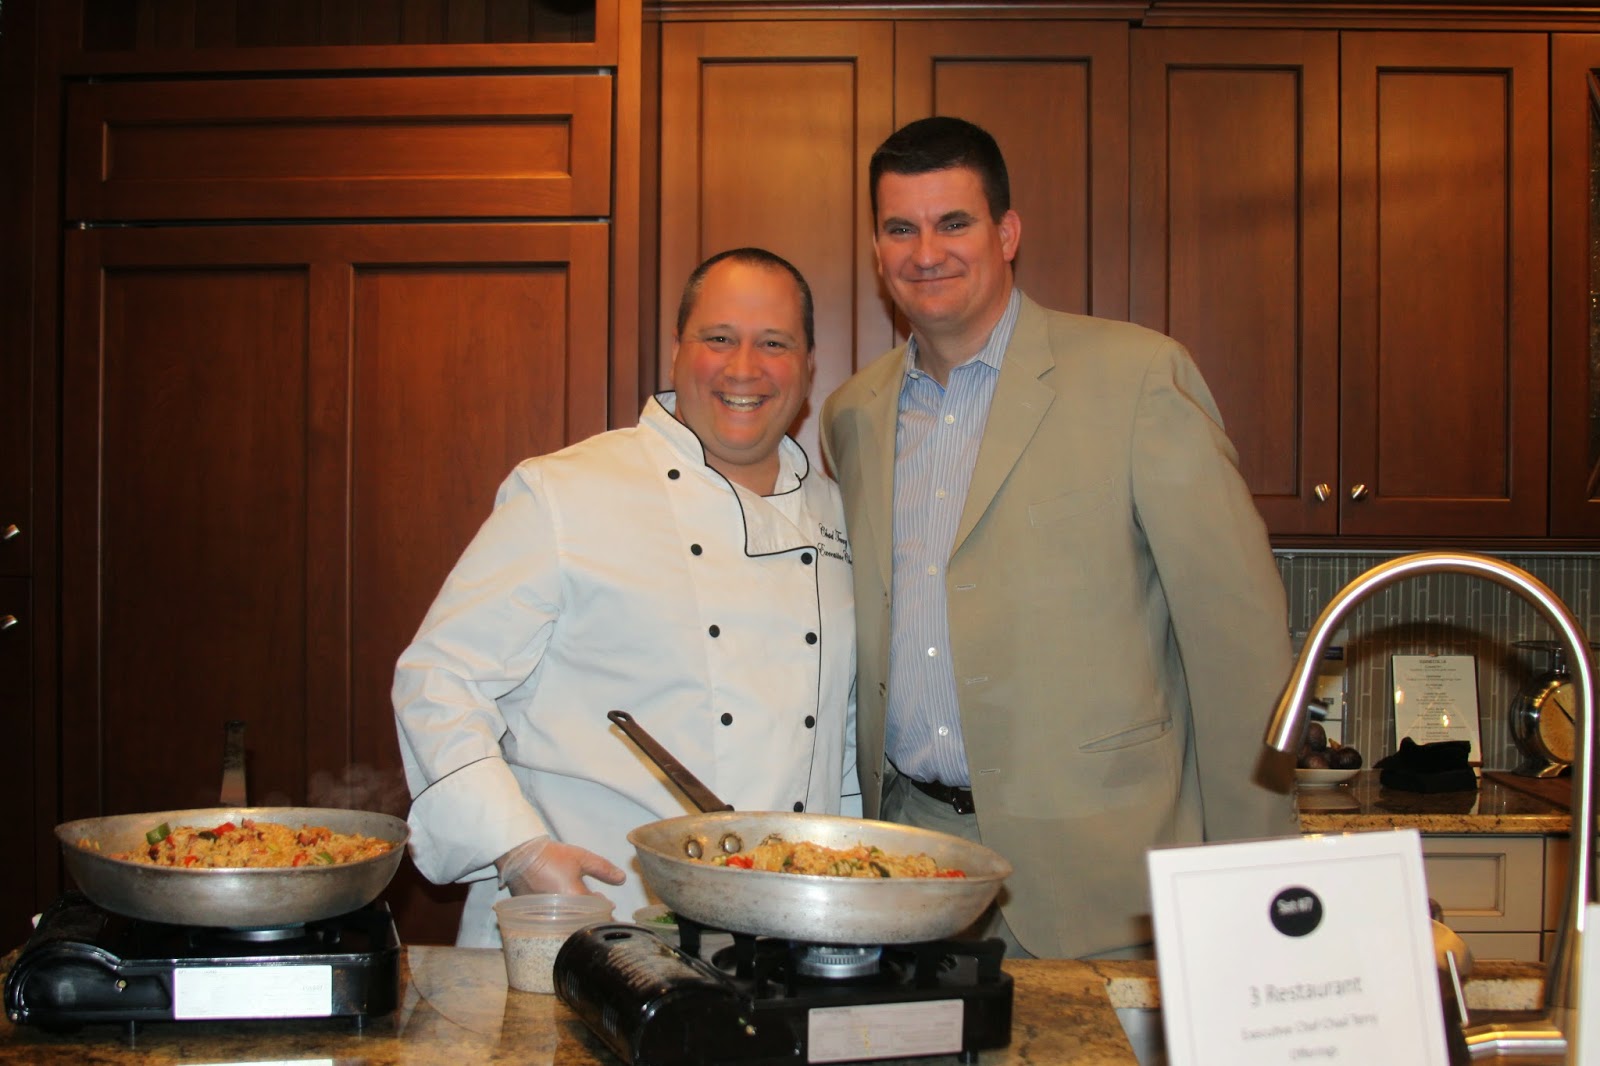 Pictured from Franklin's 3 Restaurant are Executive Chef Chad Terry and General Manager Brian Ravella